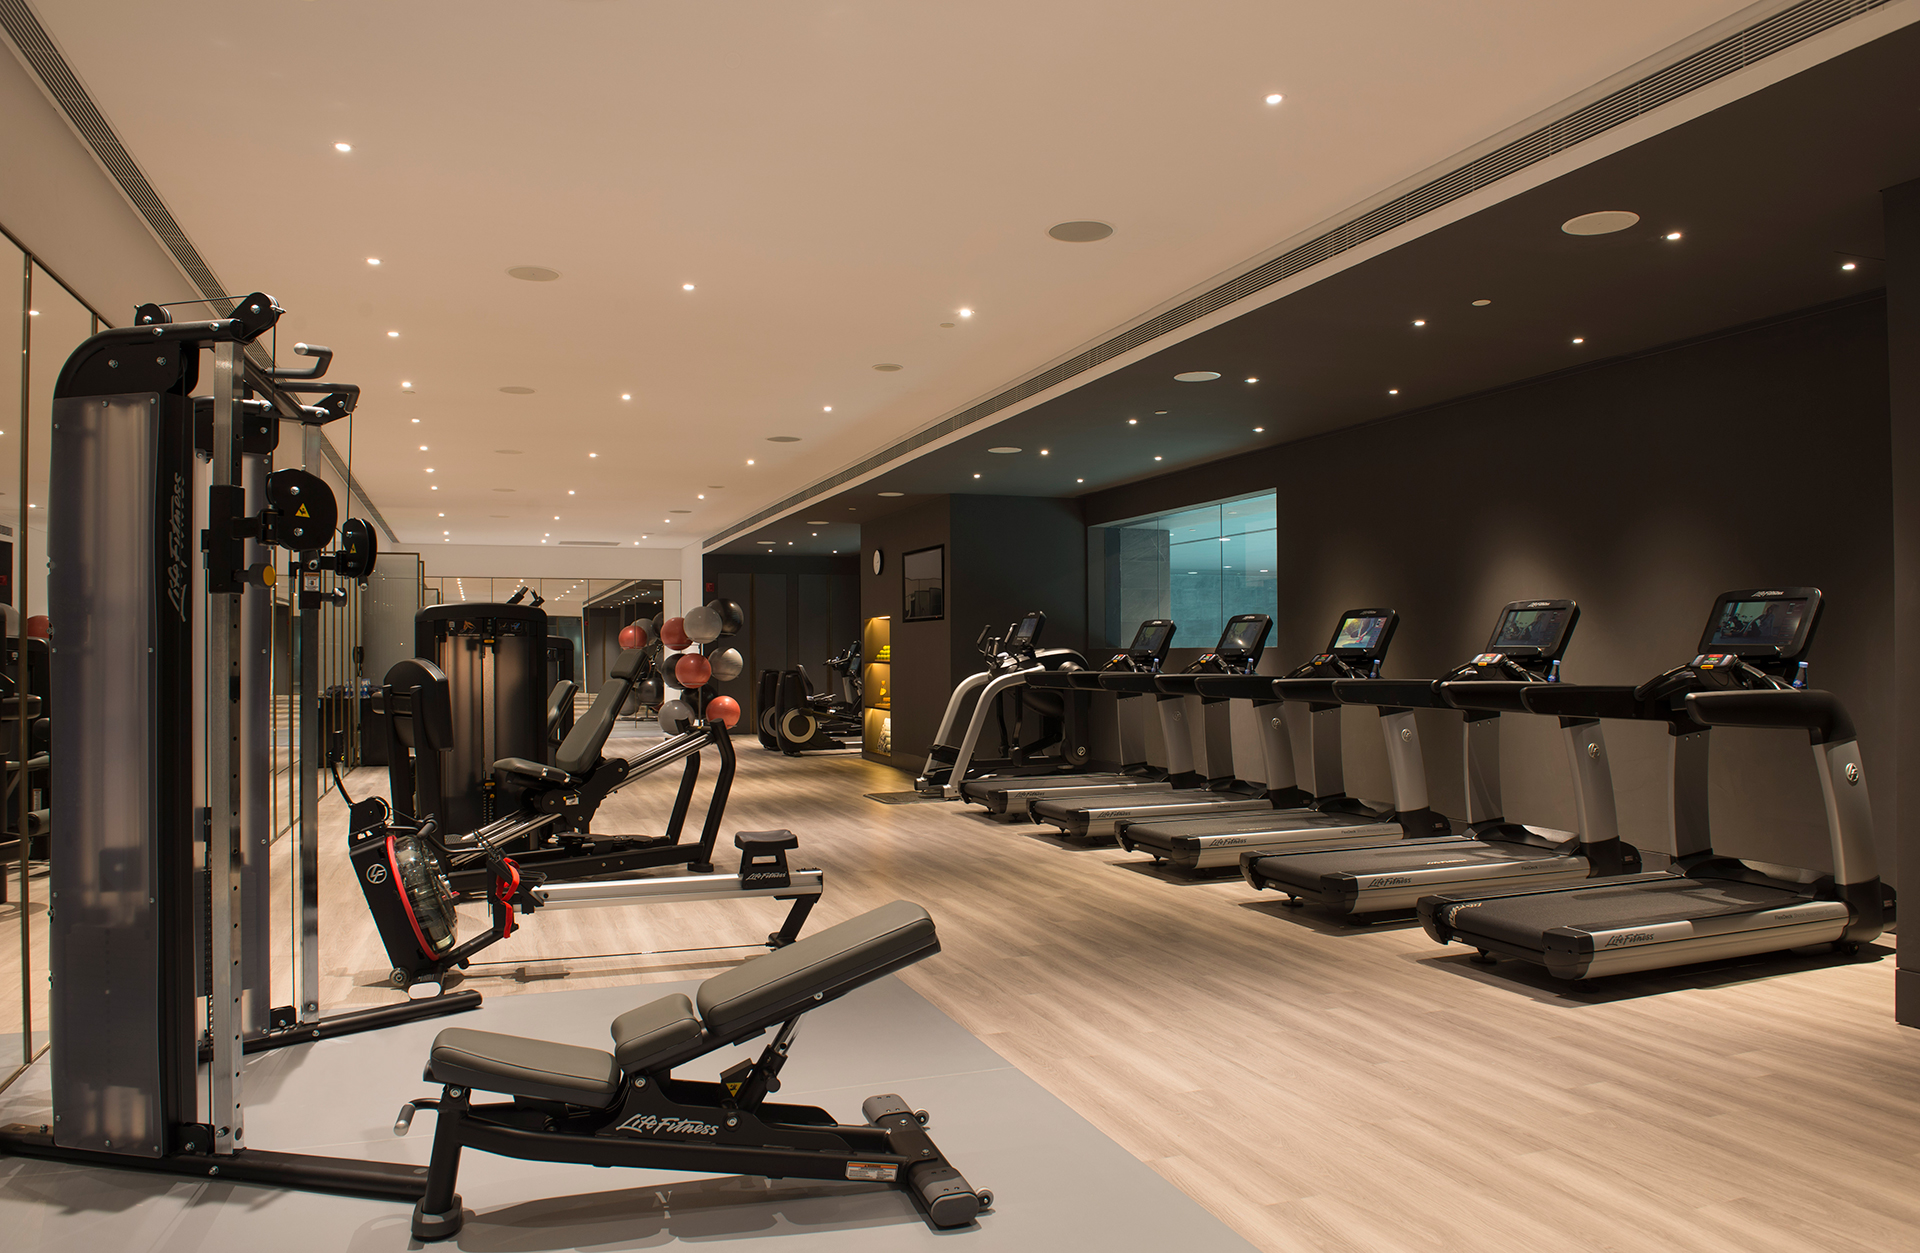 The Sukhothai Shanghai State of the Art Fitness Centre